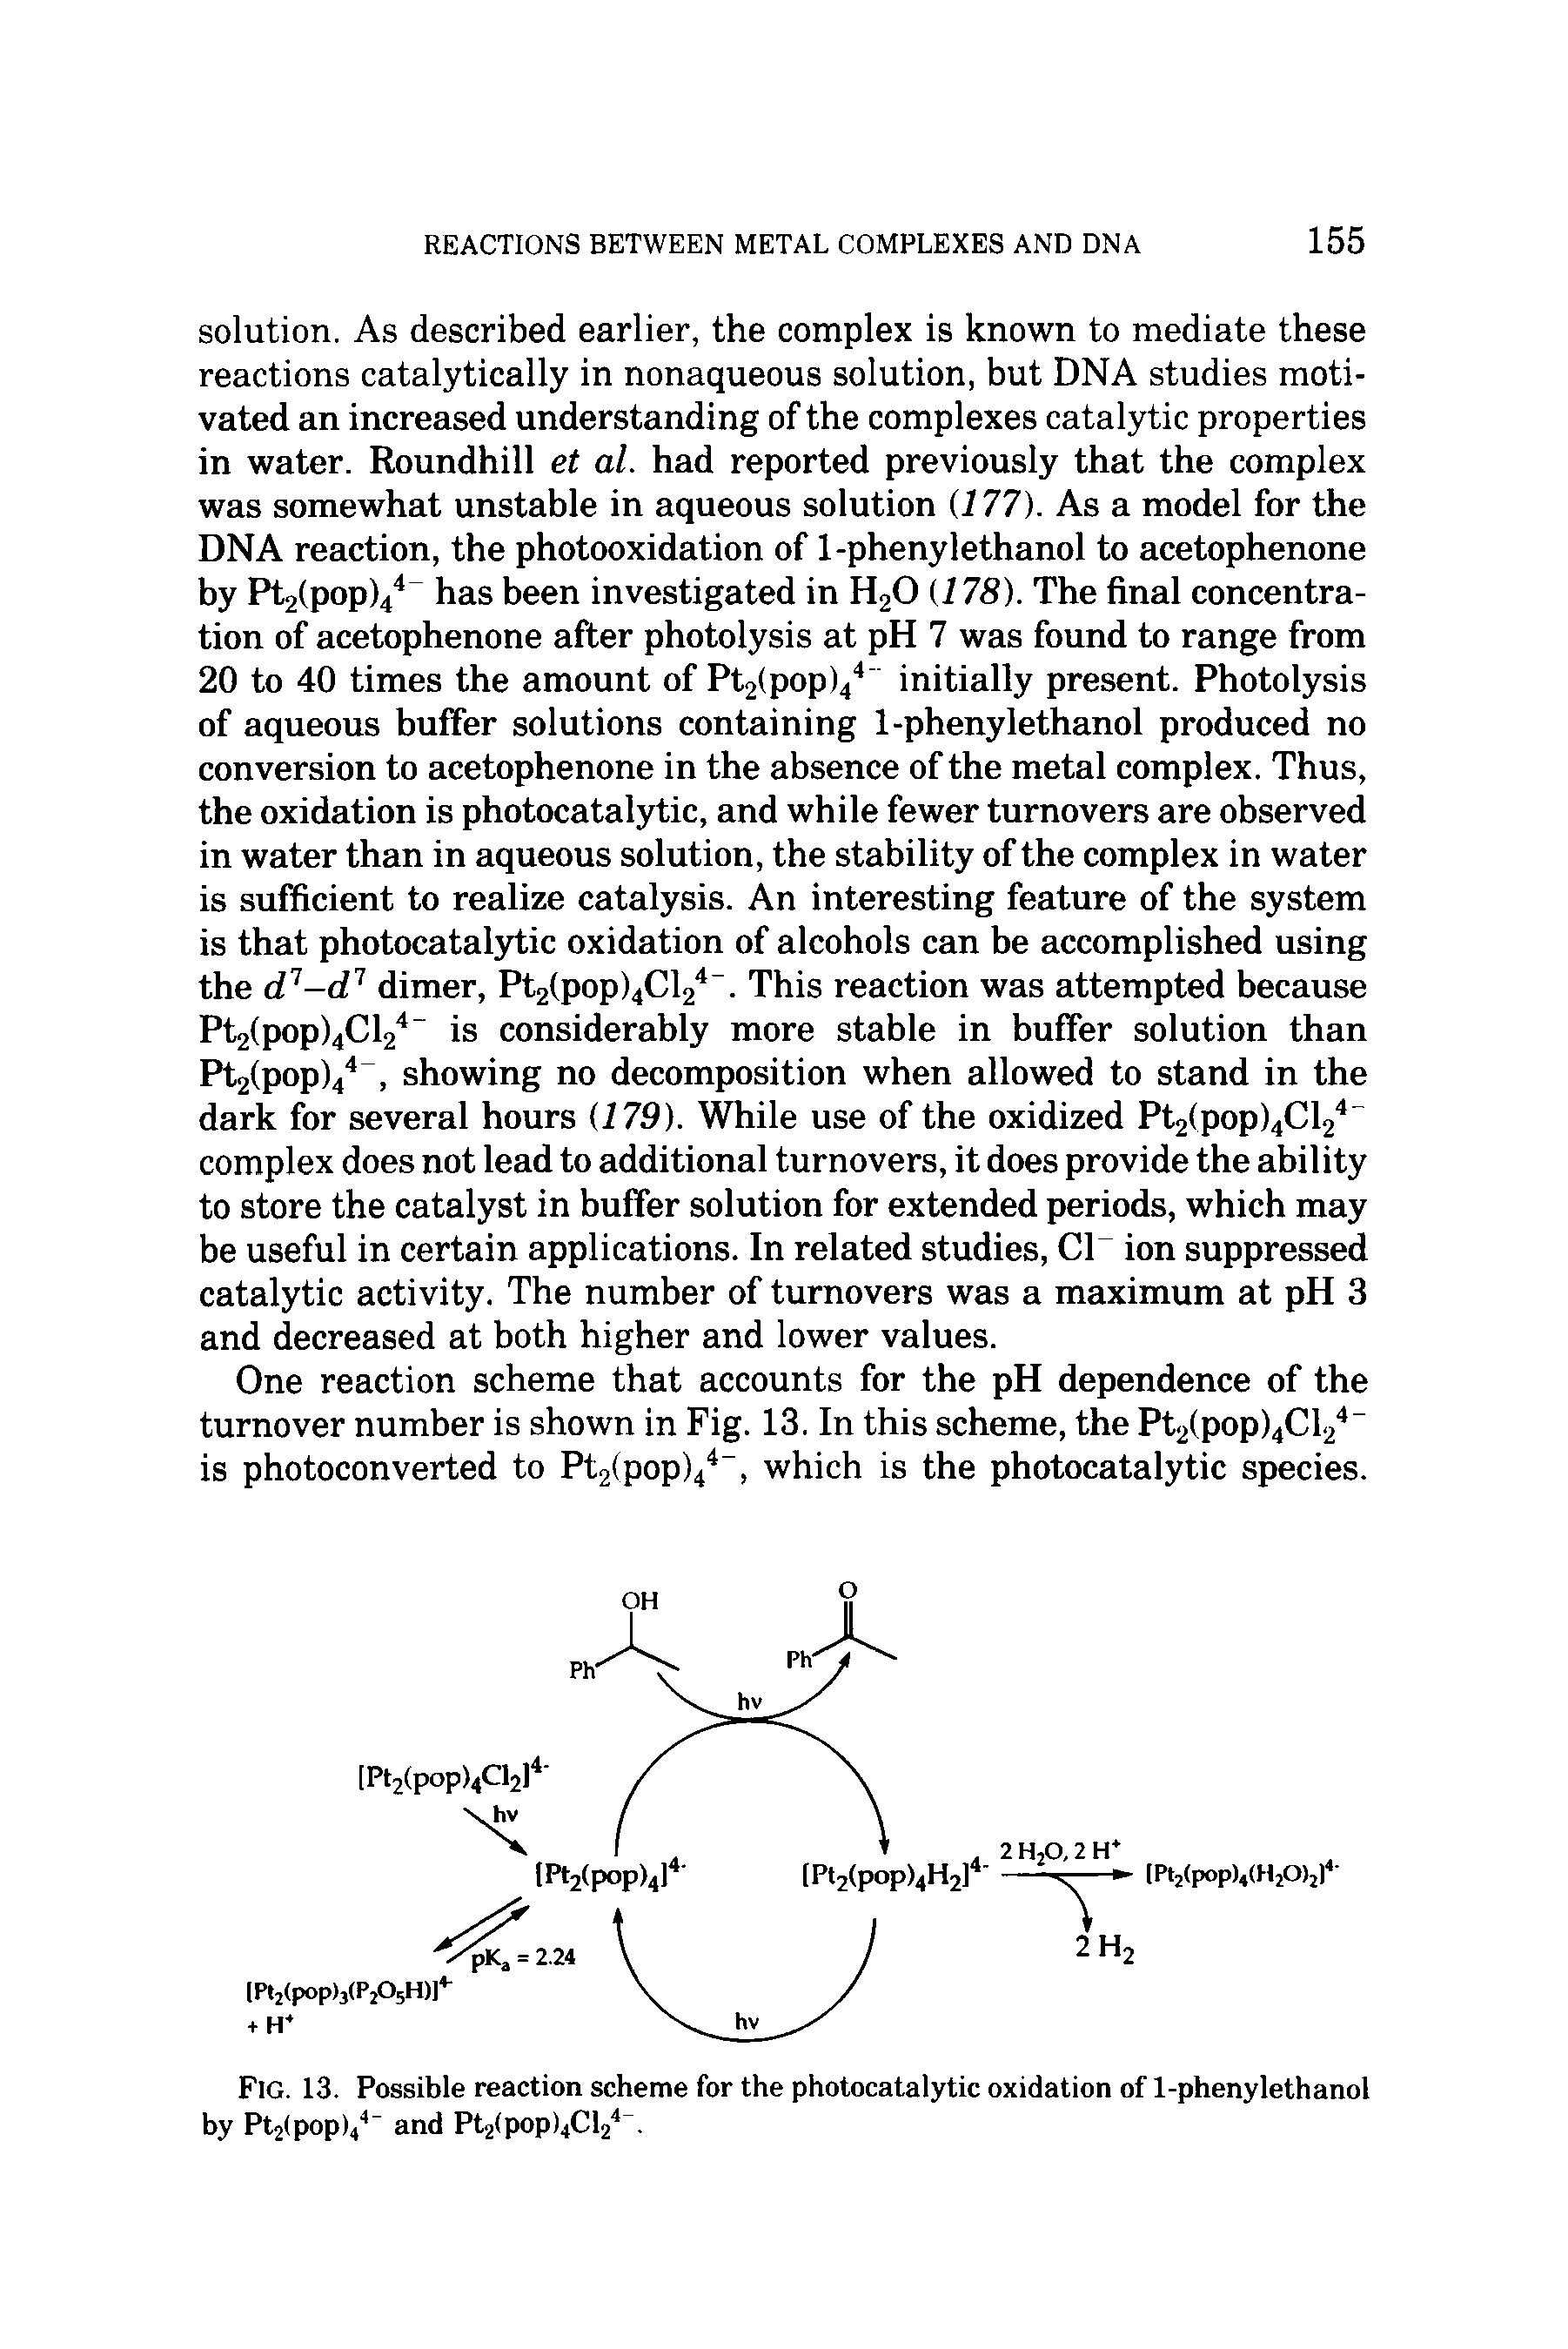 Fig. 13. Possible reaction scheme for the photocatalytic oxidation of 1-phenylethanol...